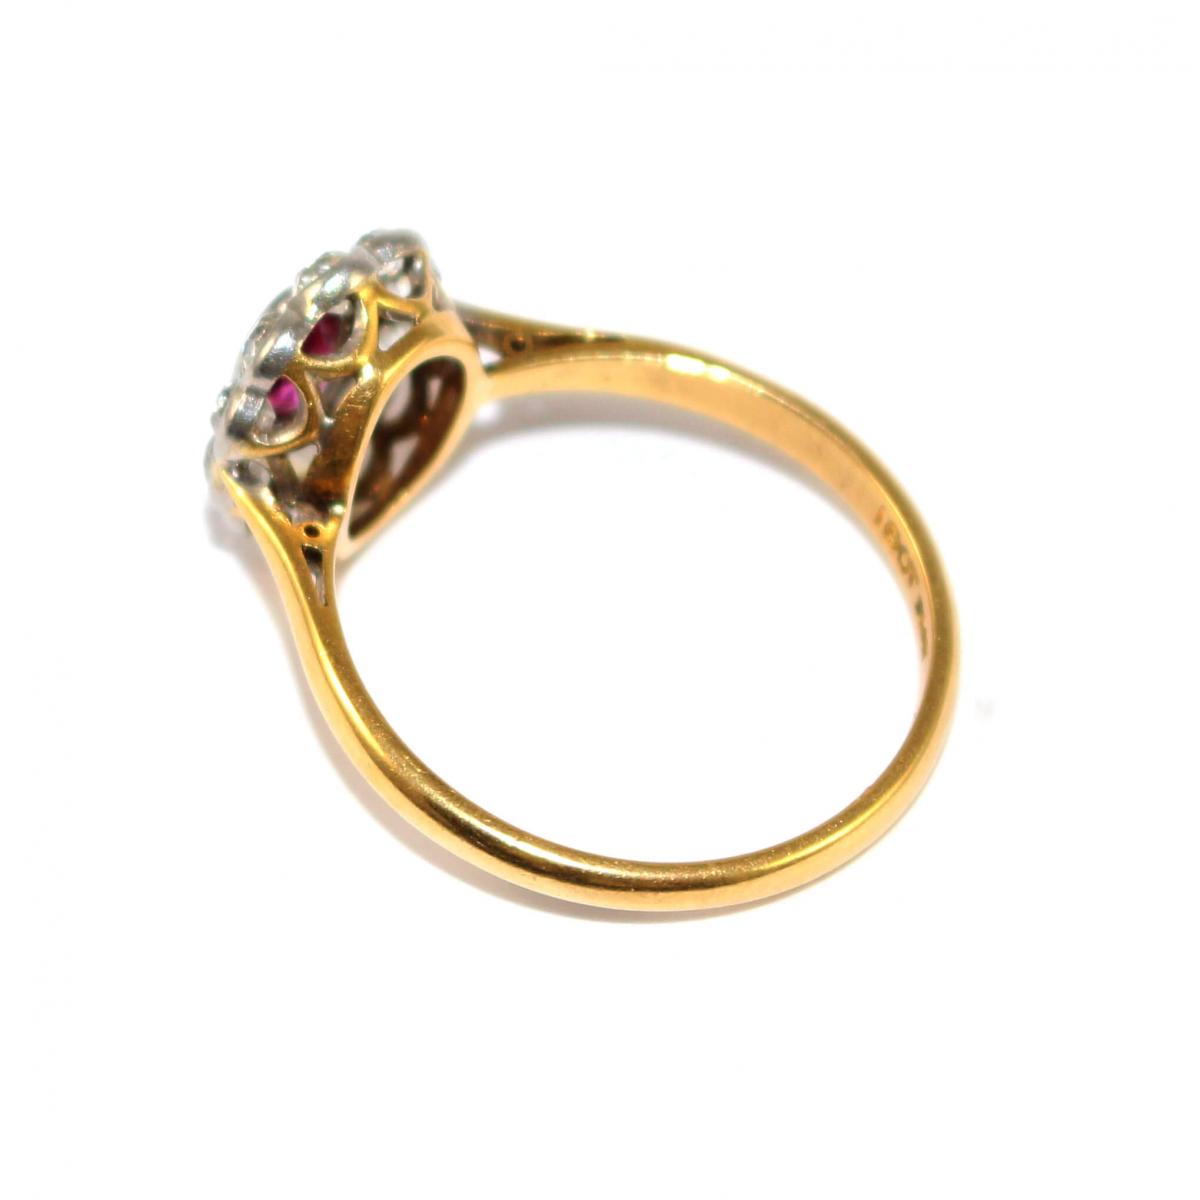 Edwardian Pink Sapphire Oval Cluster Ring c.1925